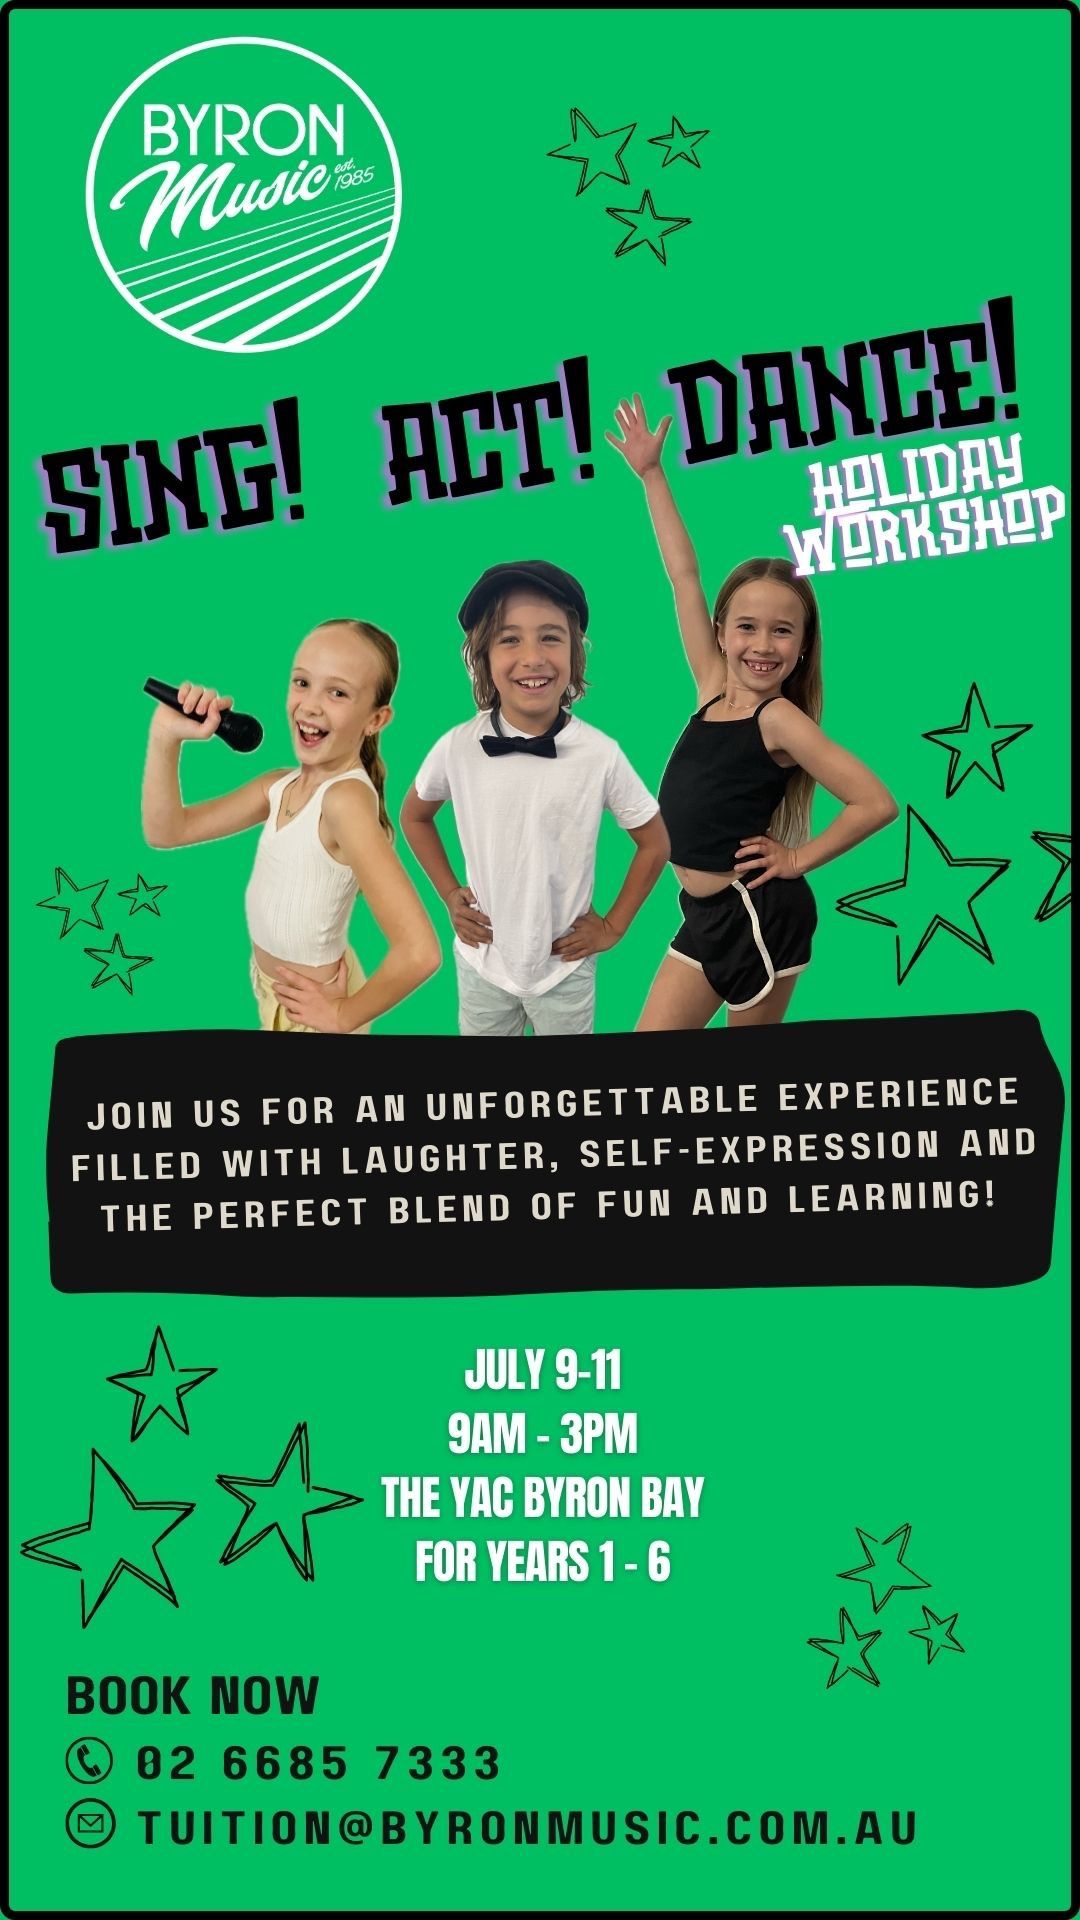 SING! ACT! DANCE! Holiday Workshop by Byron Music